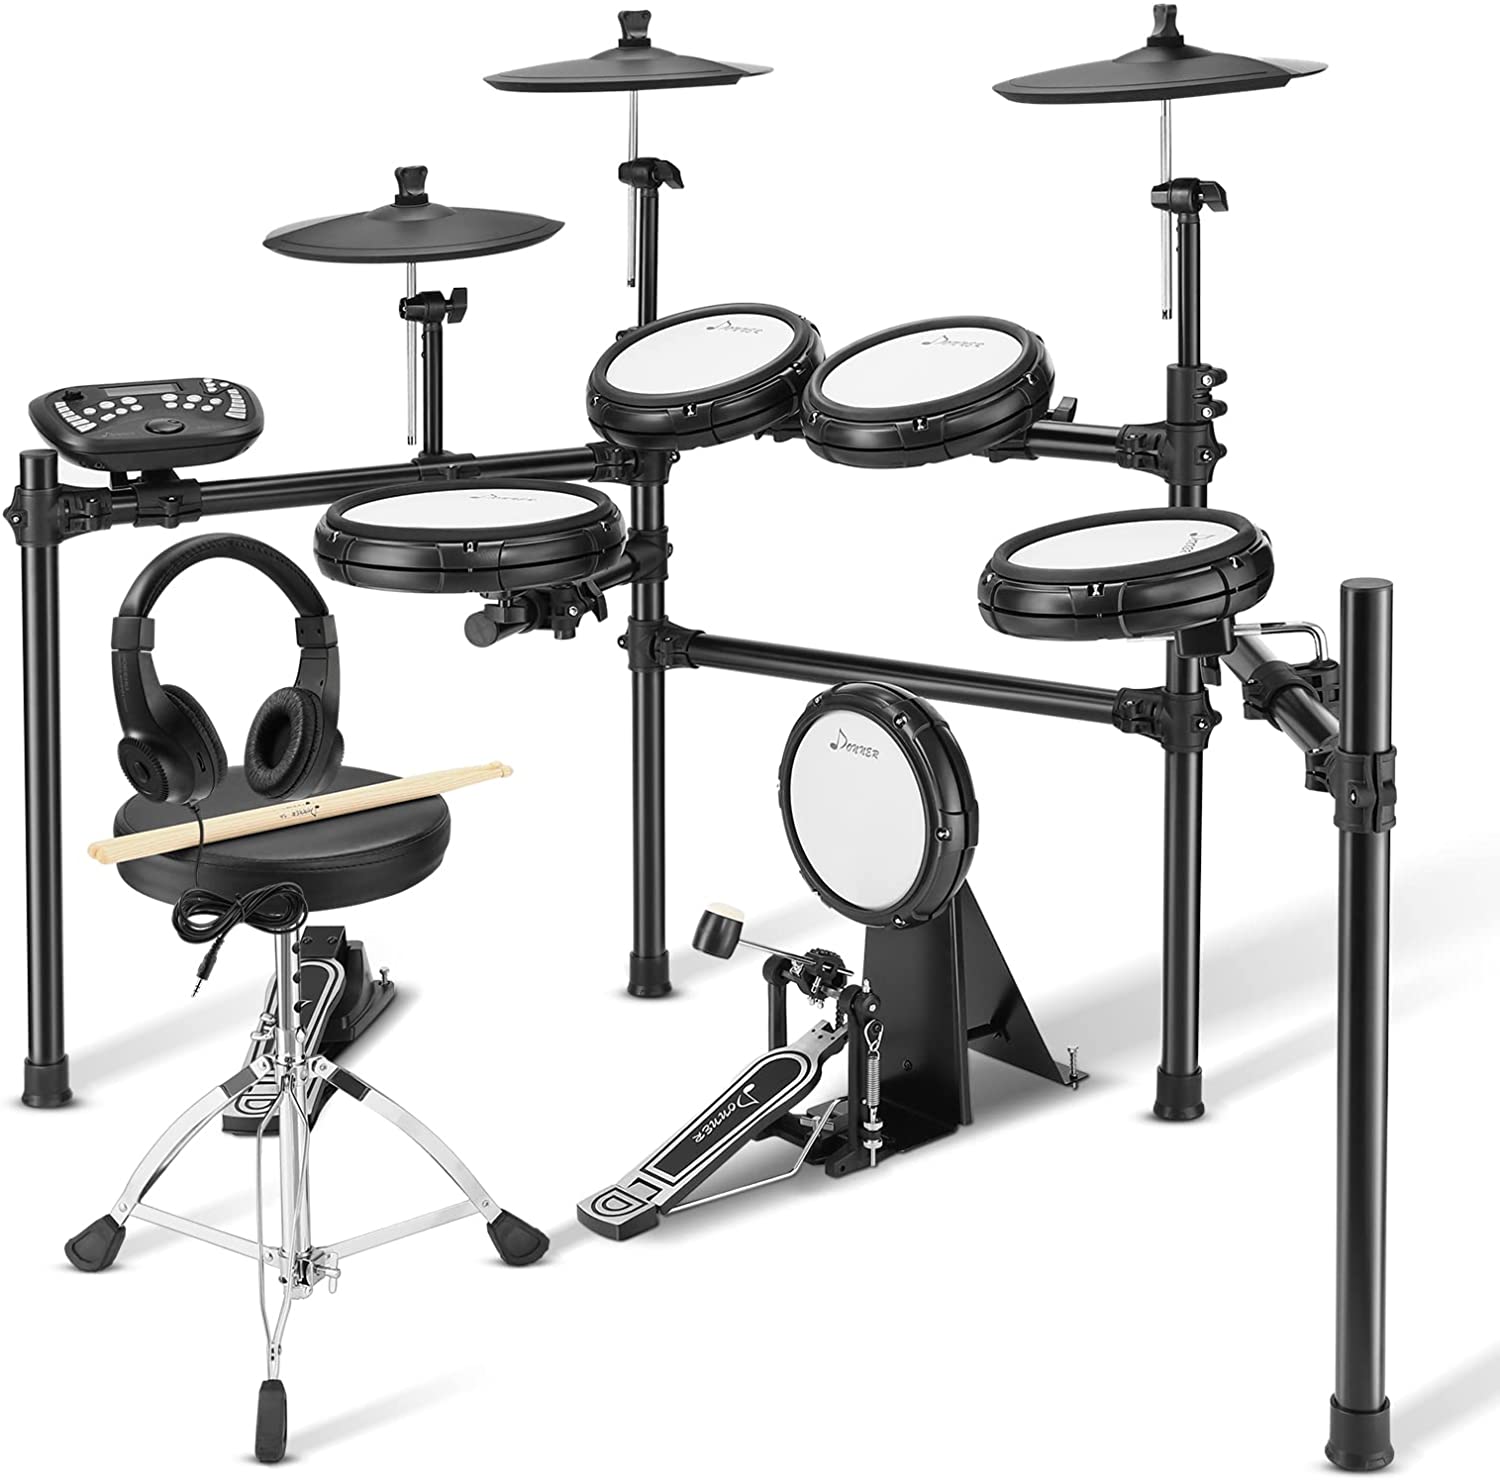 

Donner DED-400 Professional Electronic Drum Set Kit with Drum Throne/Drumsticks/Headphones/Audio Cable